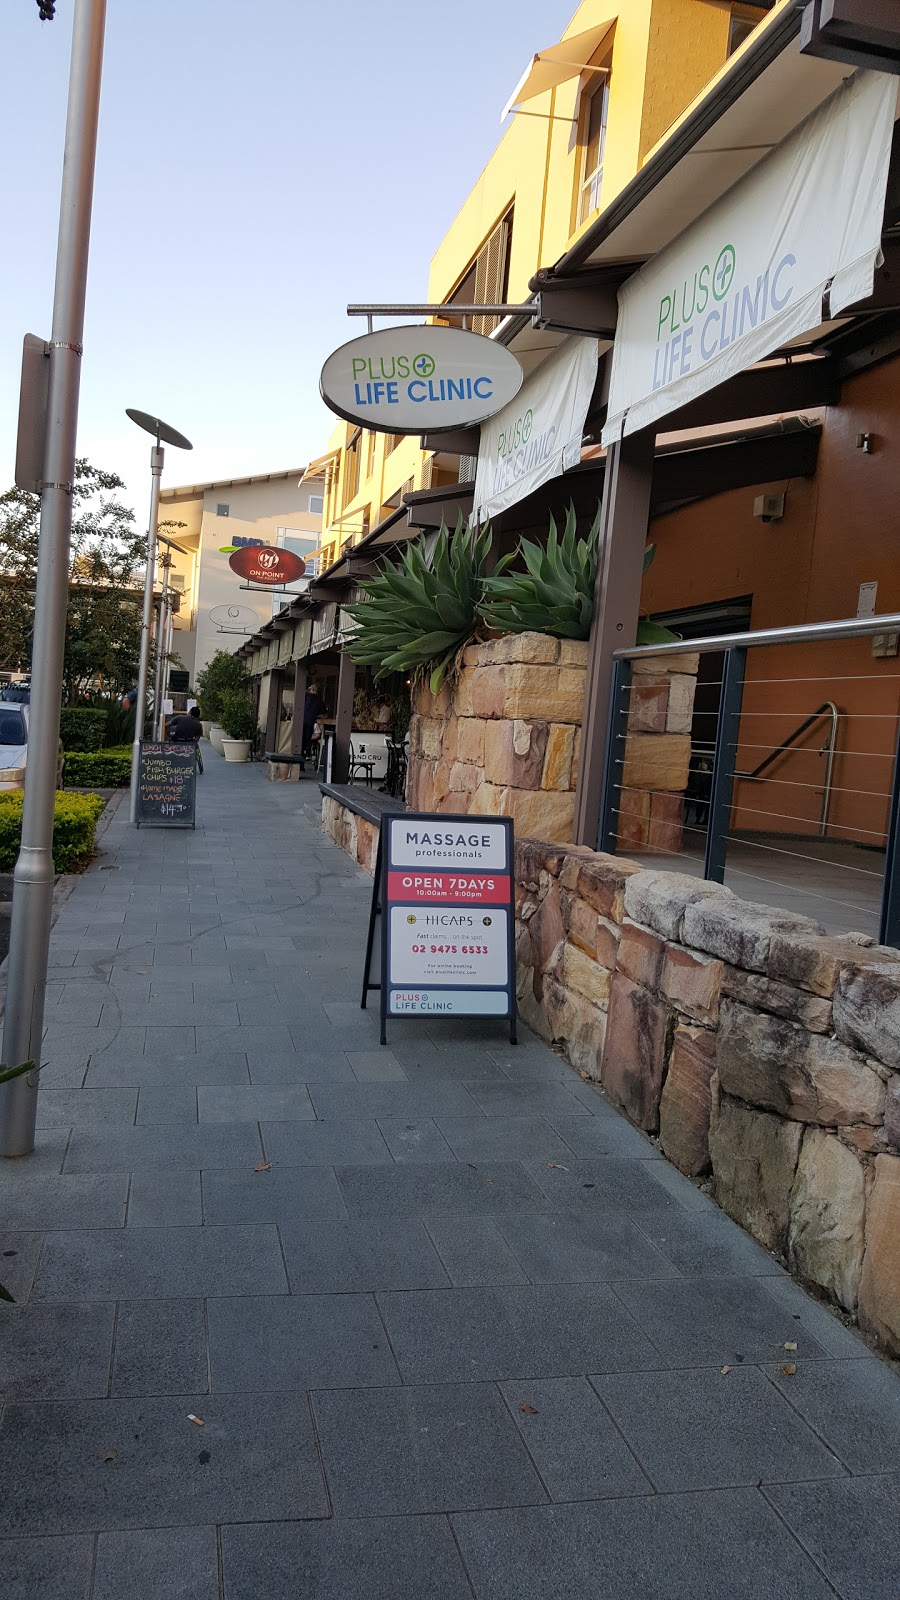 Plus Life Clinic | health | 4/4 The Piazza, Wentworth Point NSW 2127, Australia | 0294756533 OR +61 2 9475 6533